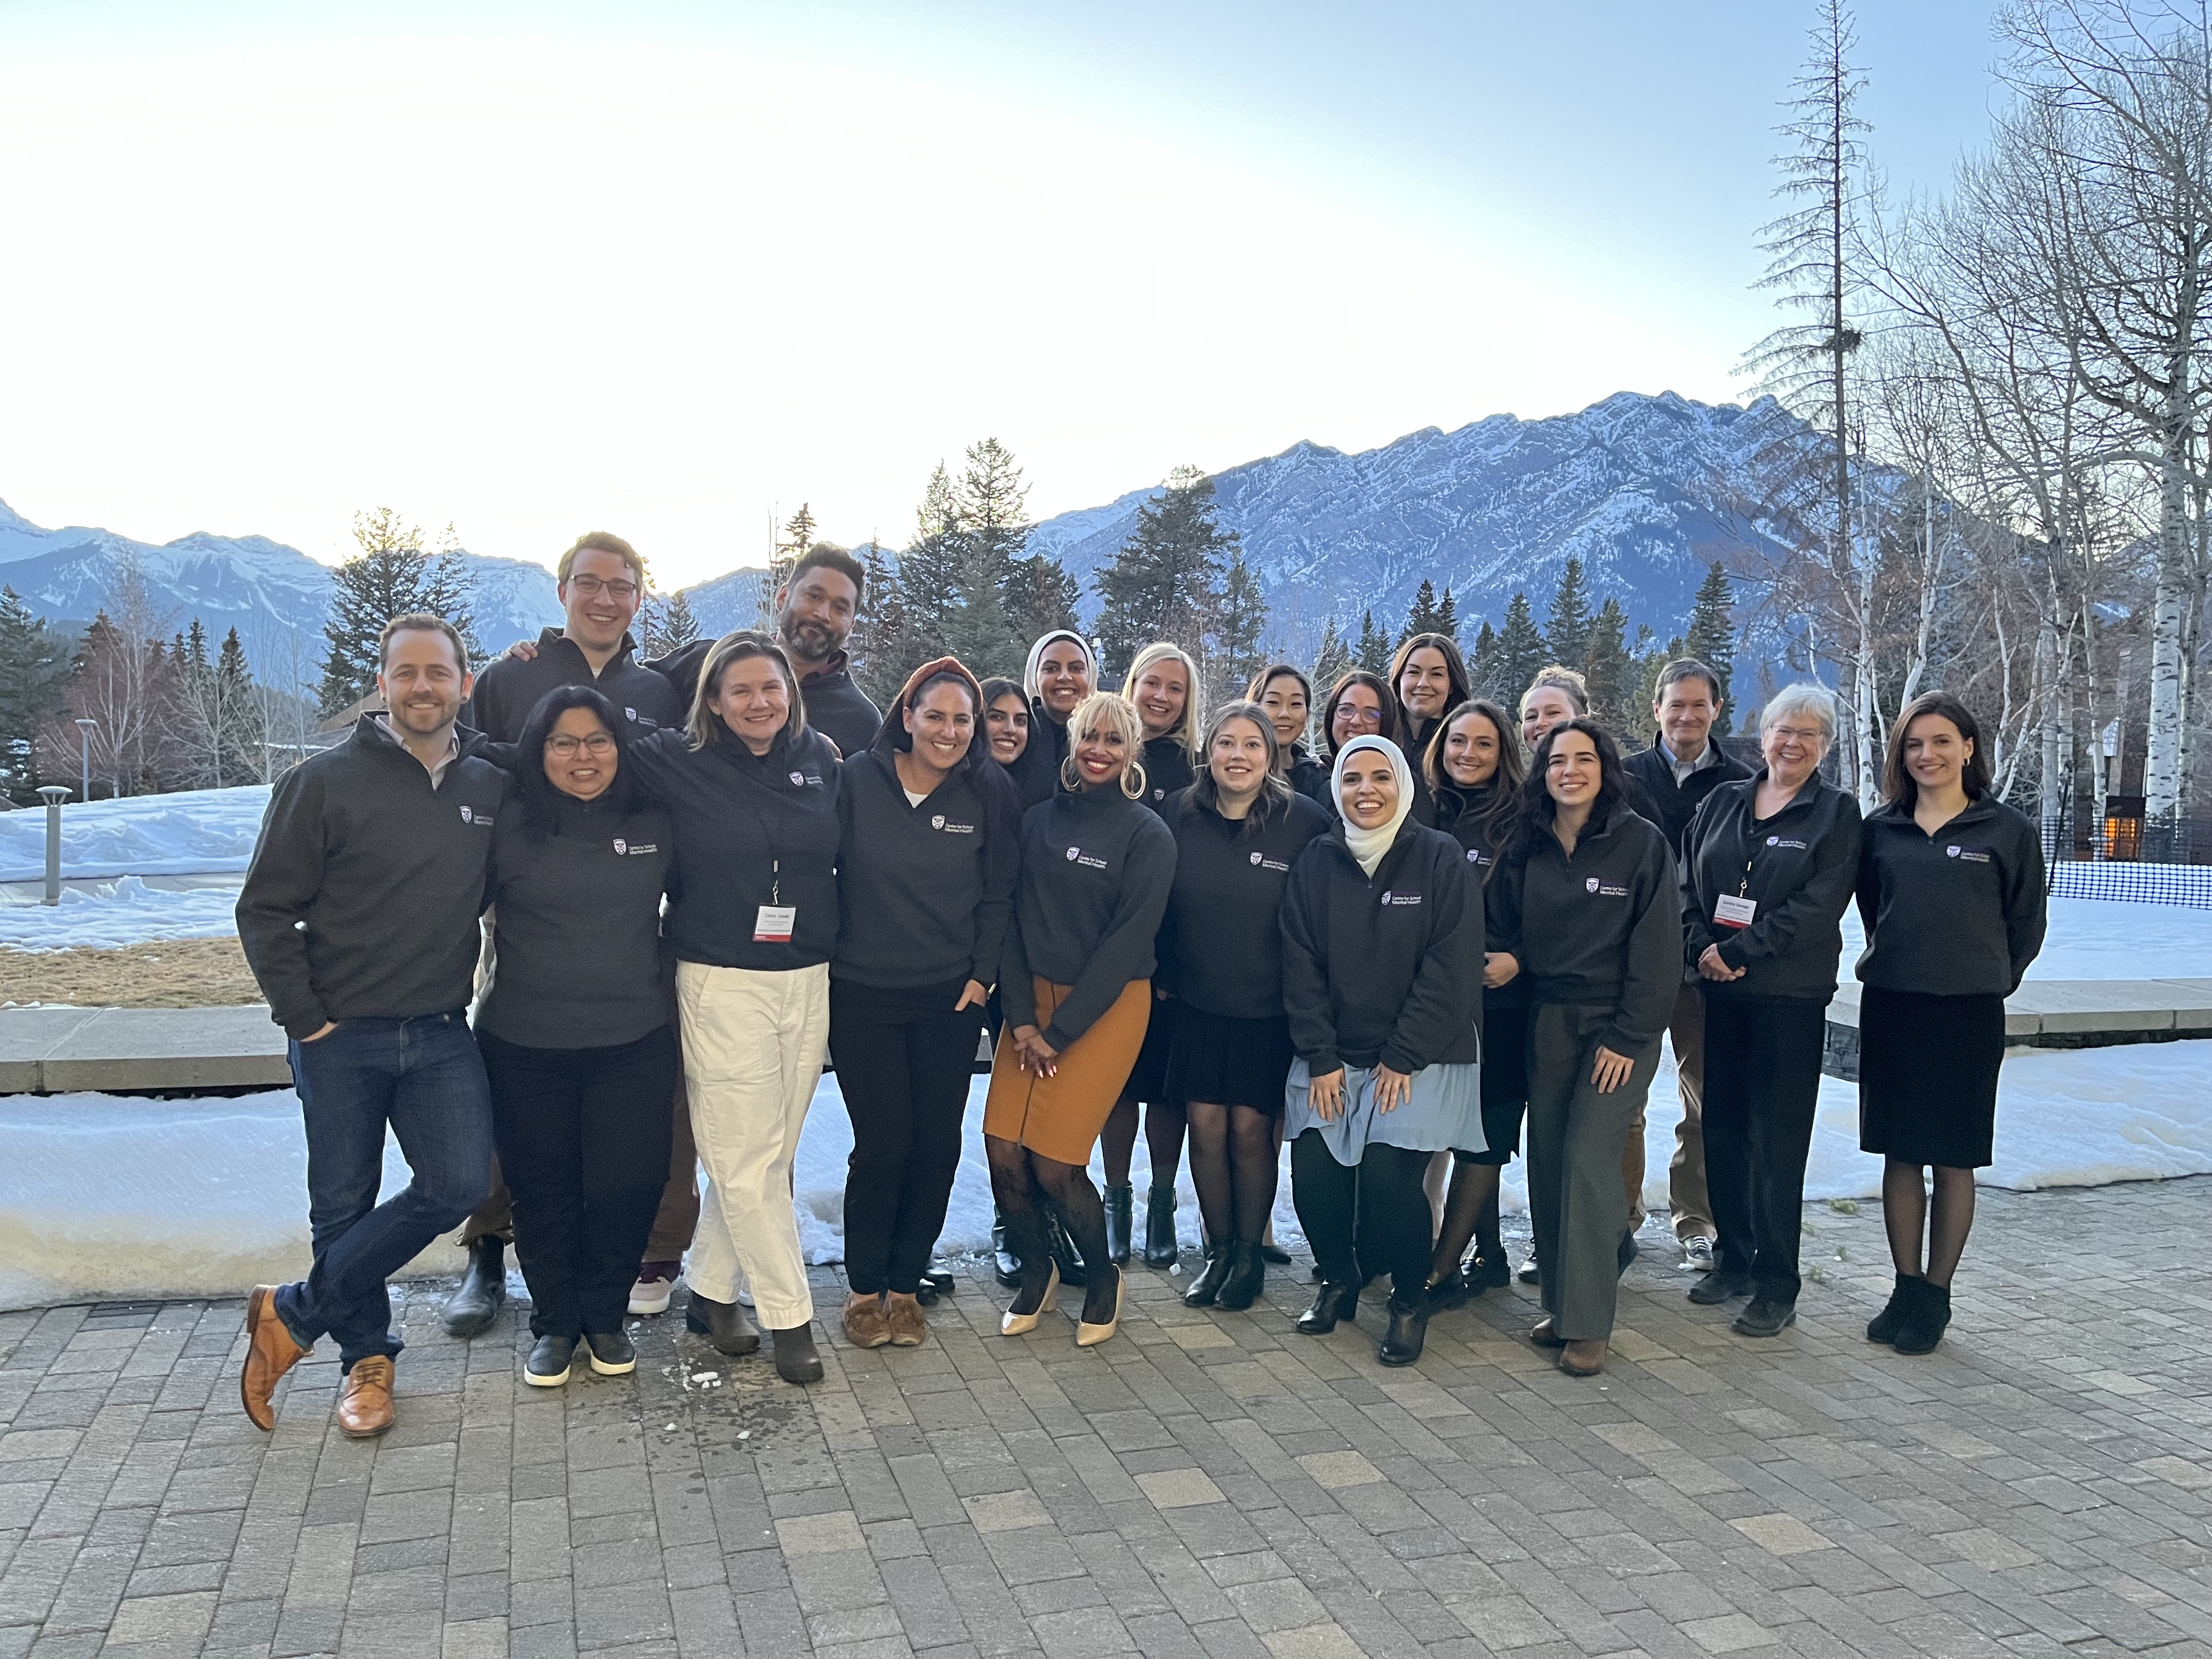 CSMH team in Banff for the 52nd  Banff International Conferences on Behavioural Science